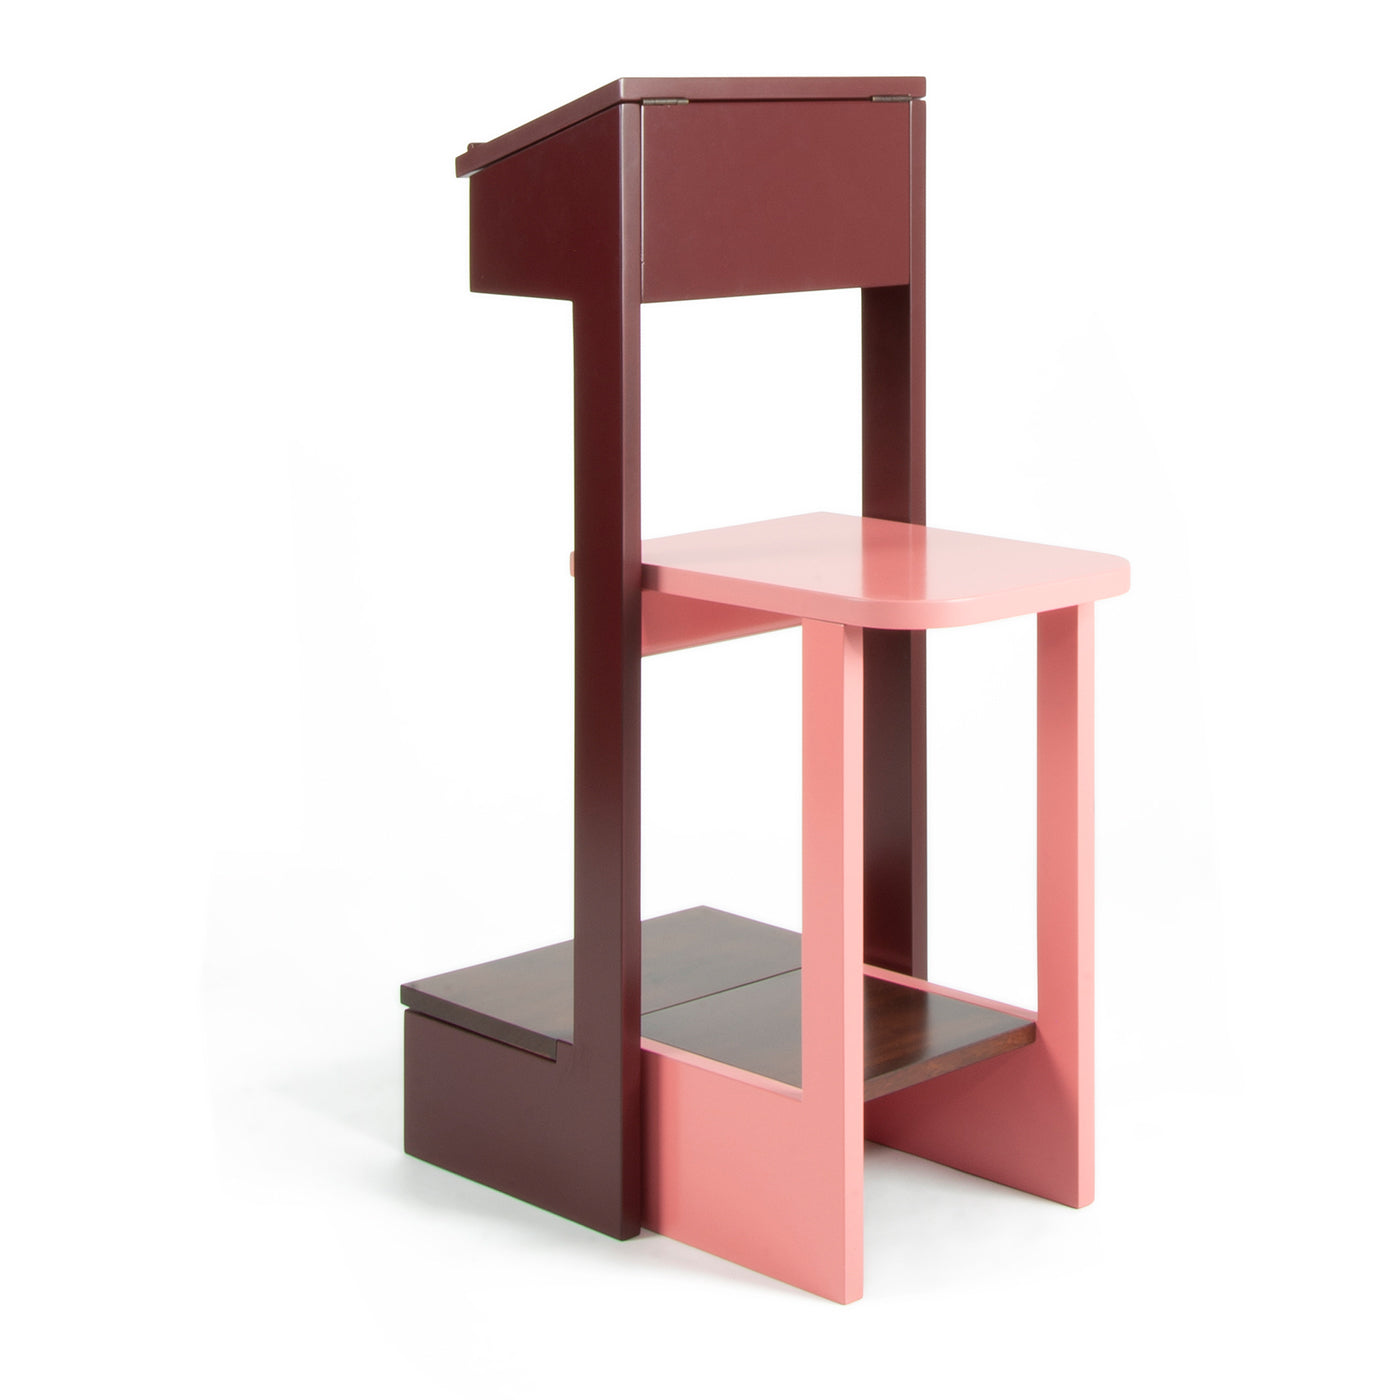 Trab C Multifunctional Unit Limited Edition by Standa - Alternative view 1